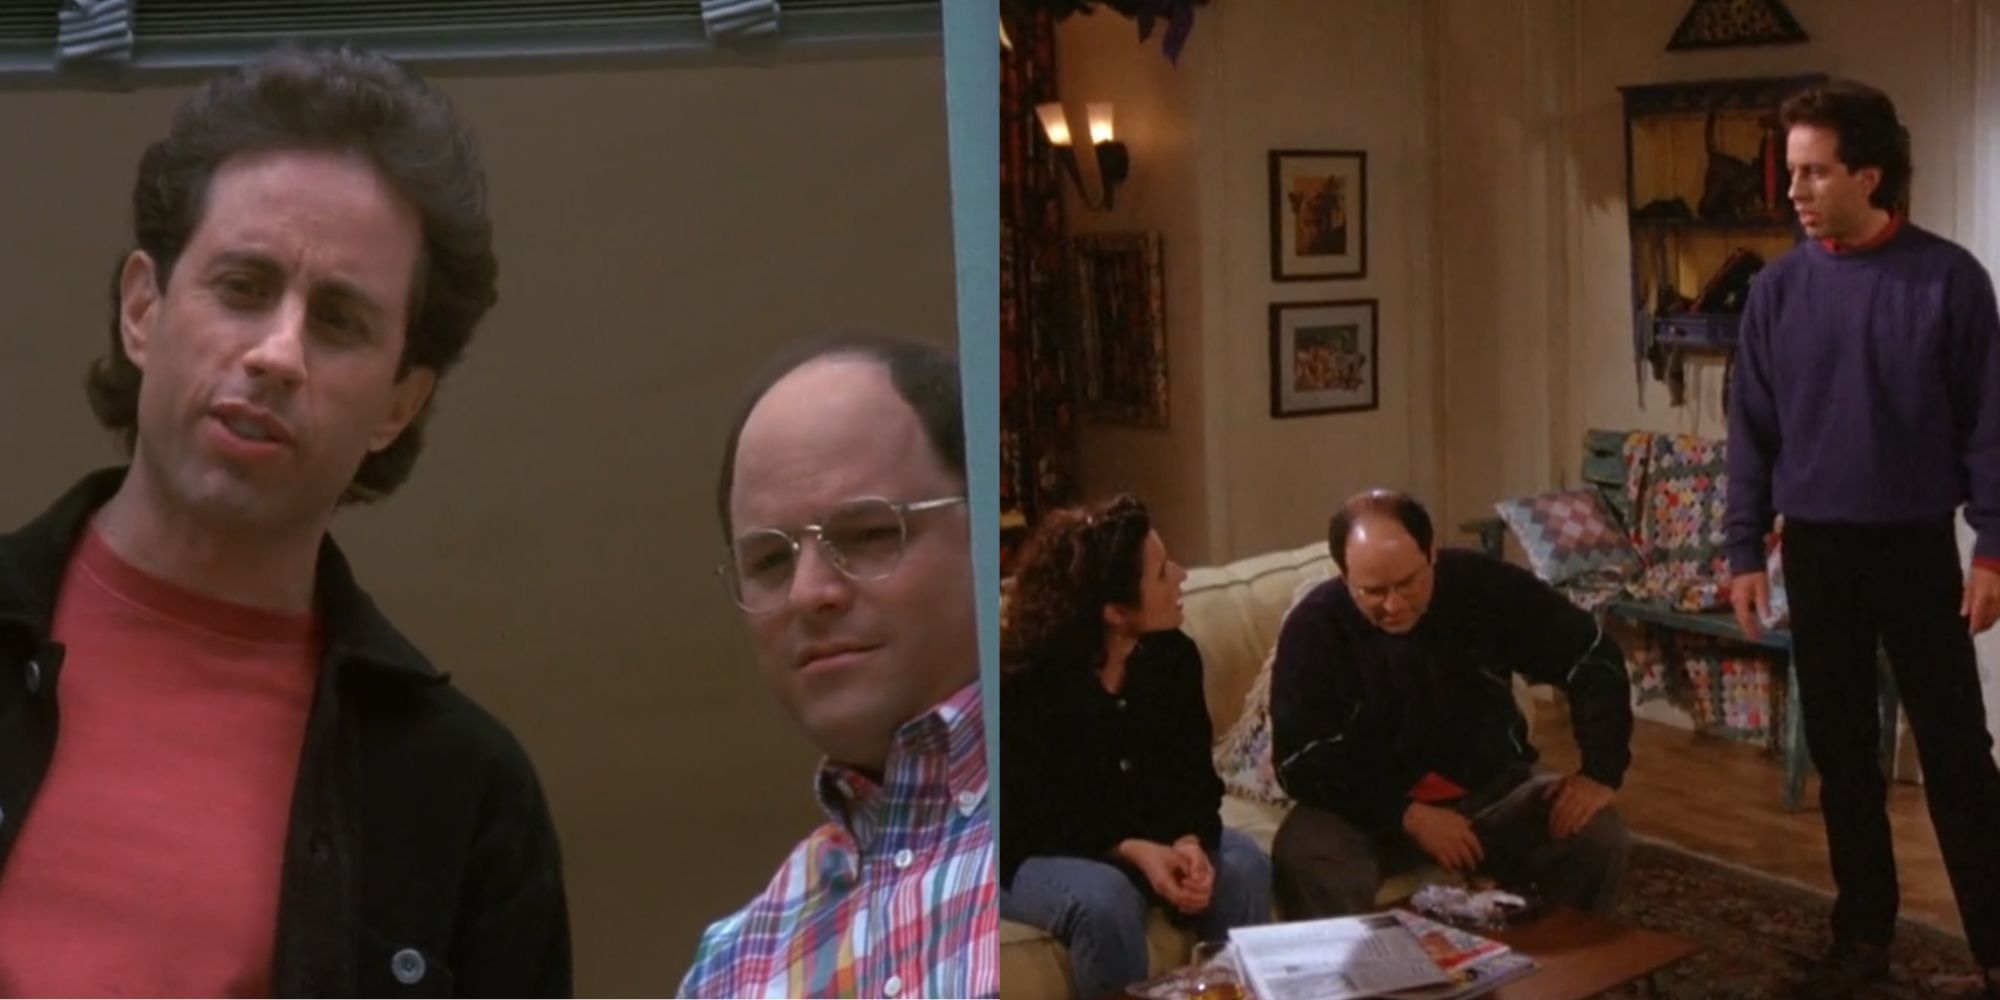 Split feature image showing Jerry George and Elaine in Seinfeld.